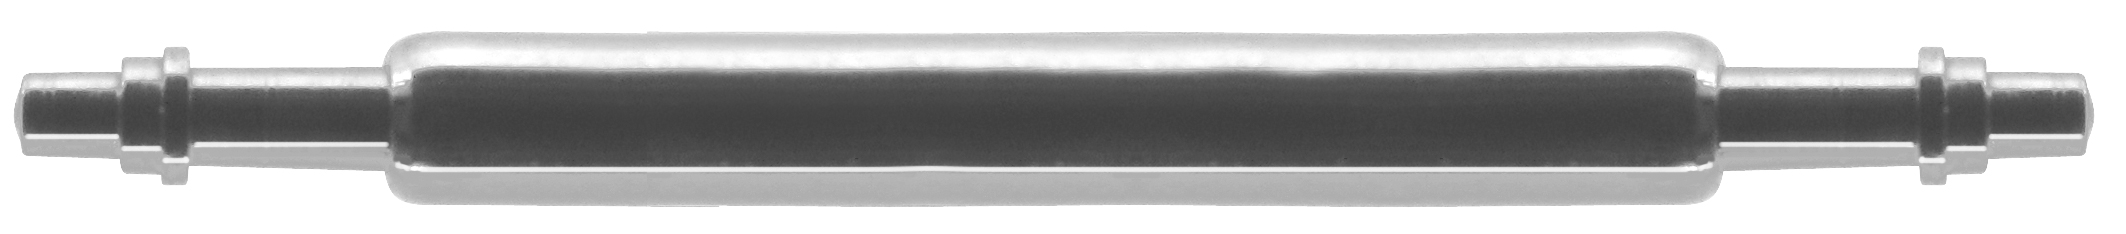 Spring bar 215E white stainless steel, Ø 1.5 length 28.0 mm, pins with approach